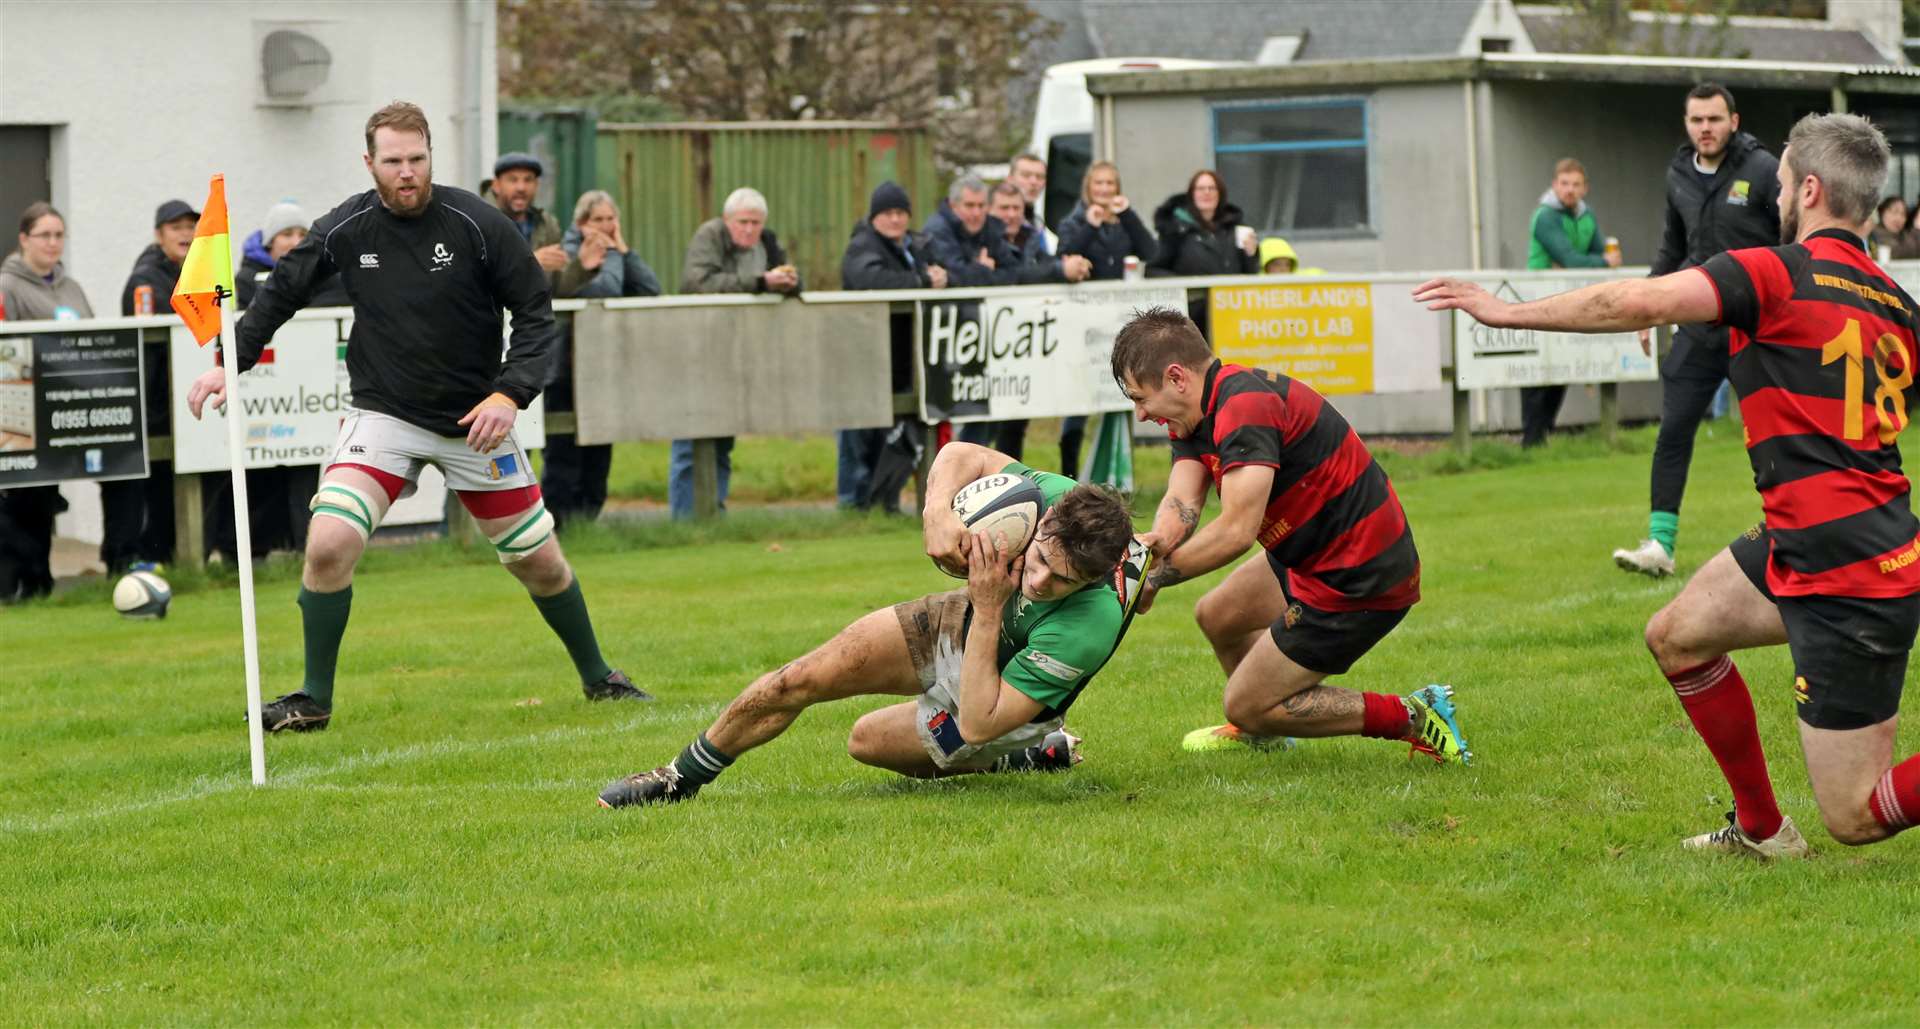 Euan Macdonald scoring a try in the Greens' 39-0 victory over Grangemouth at Millbank in October. Picture: James Gunn